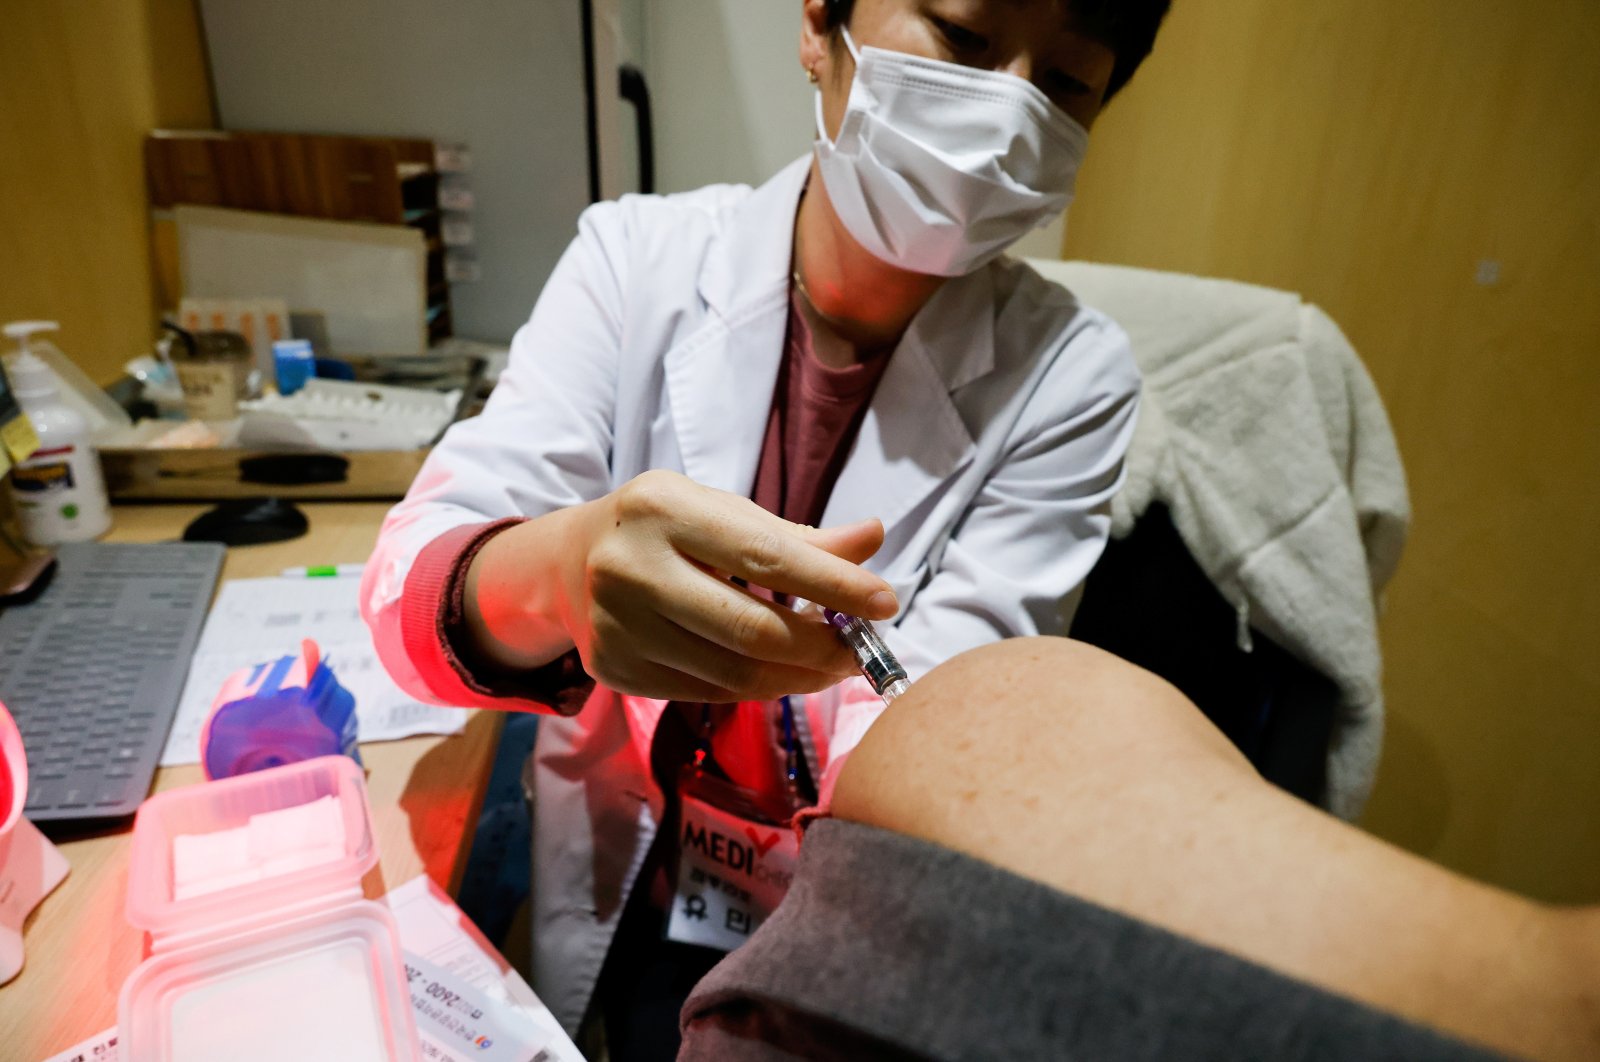 A man gets an influenza vaccine at a branch of the Korea Association of Health Promotion in Seoul, South Korea, Oct. 23, 2020. (Reuters Photo)